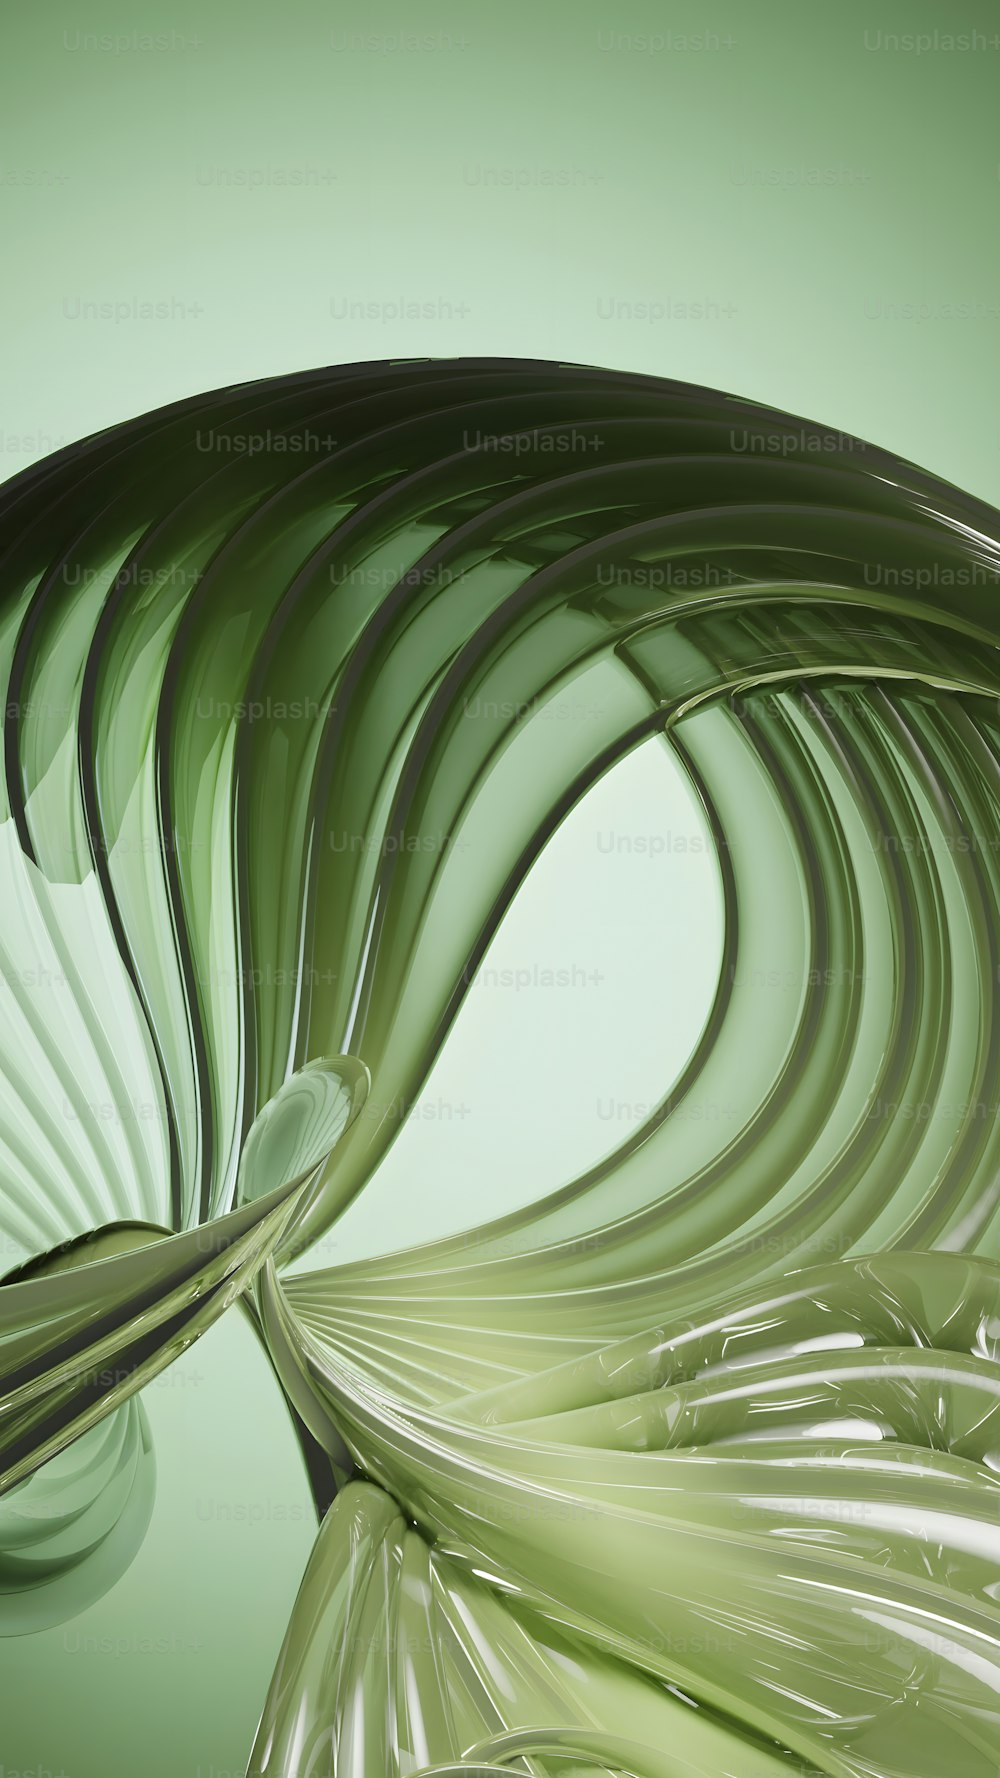 a green and white abstract design on a green background